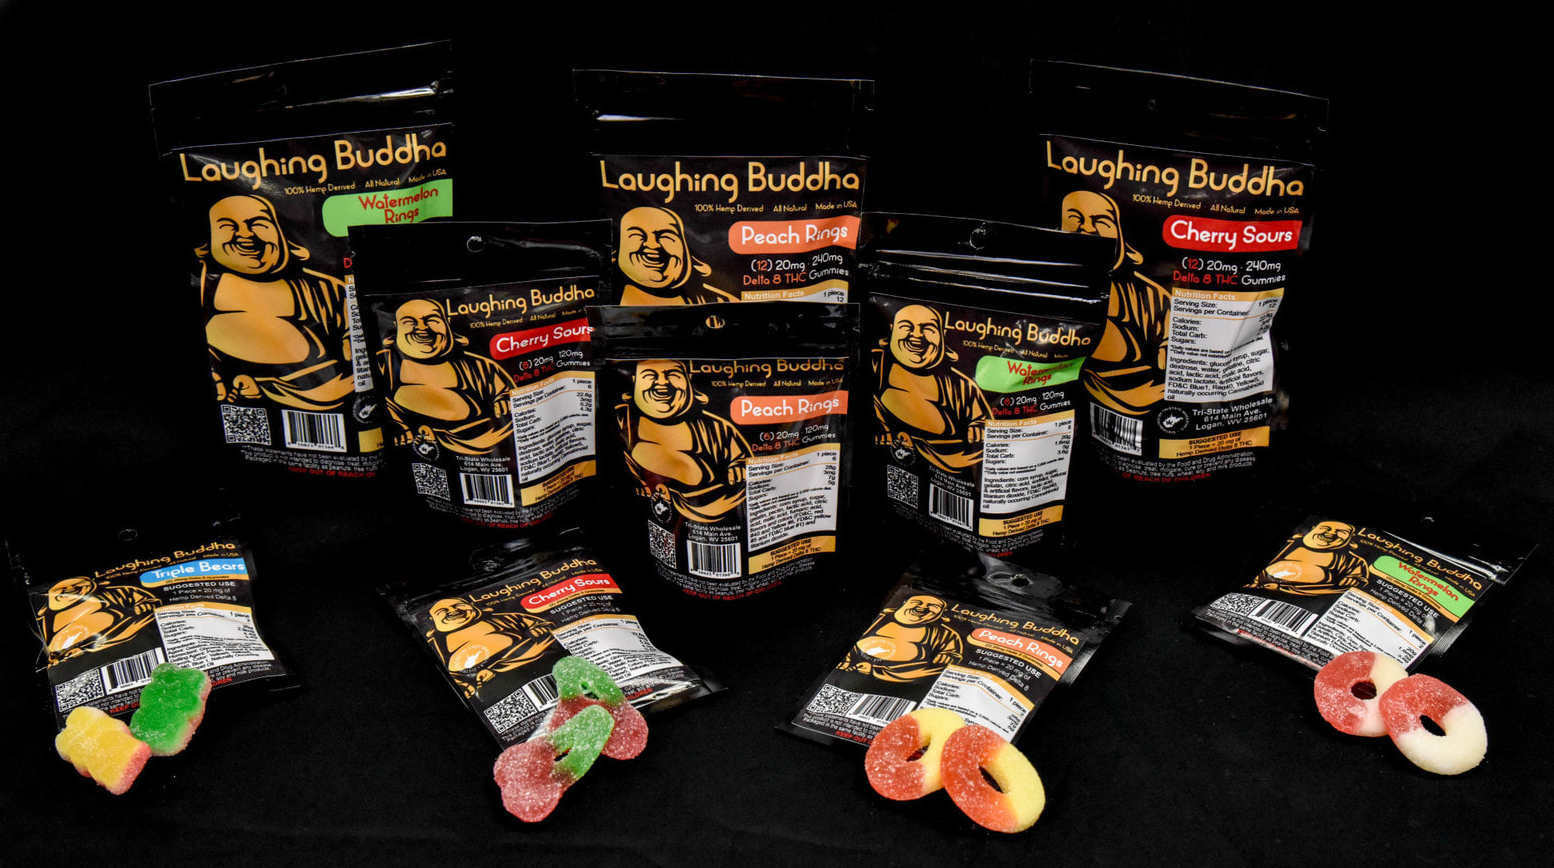 Laughing Buddha Delta 8 THC products